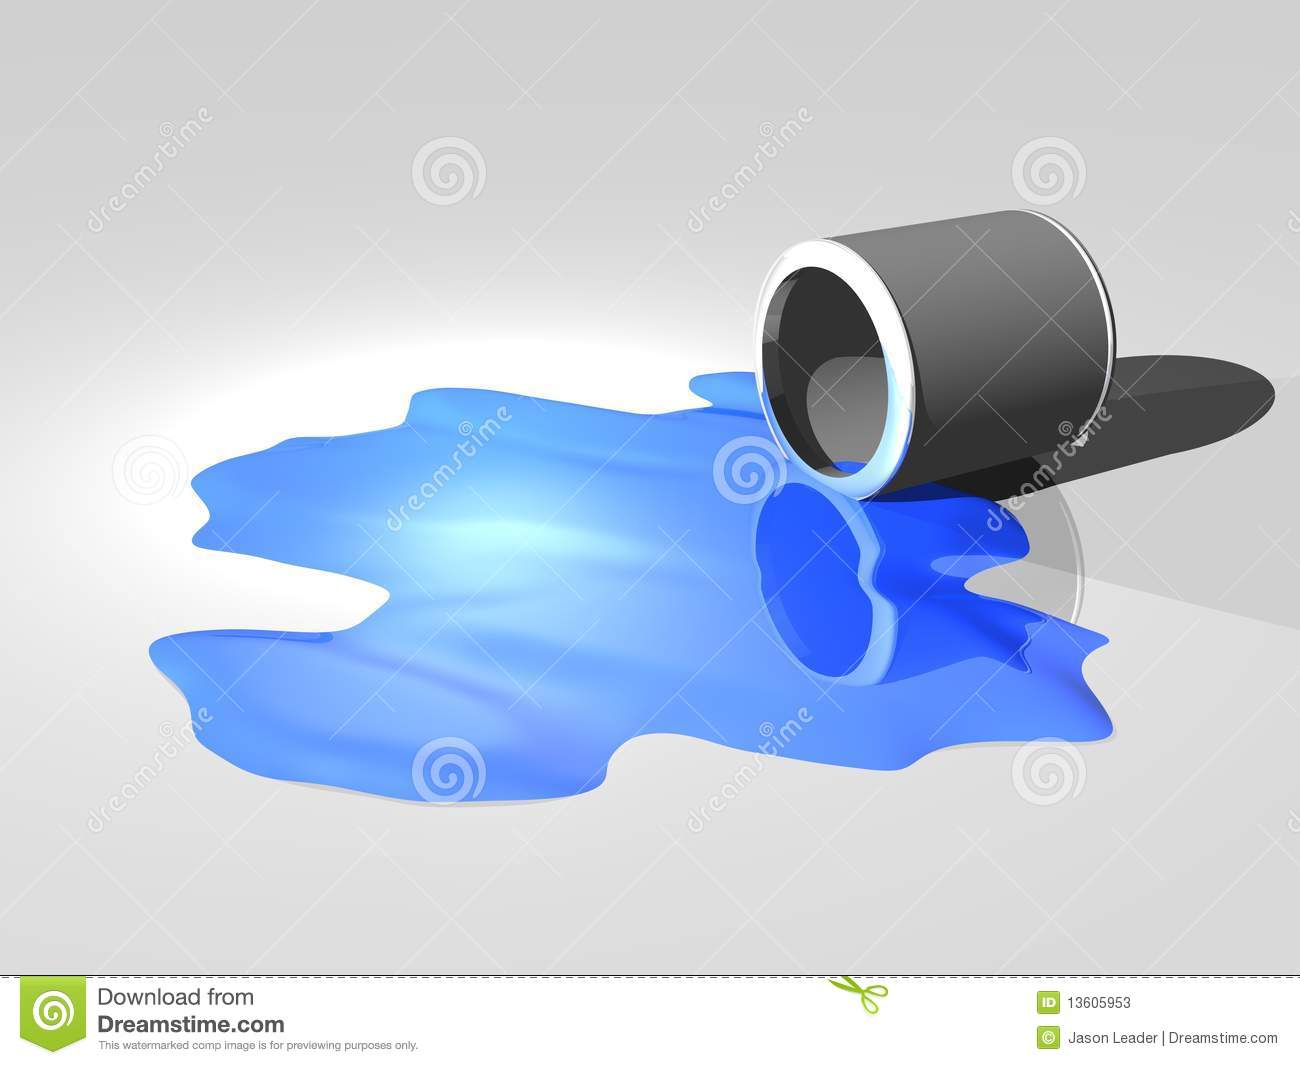 Spilled Paint Can Clipart A Bucket Of Blue Paint Spilled